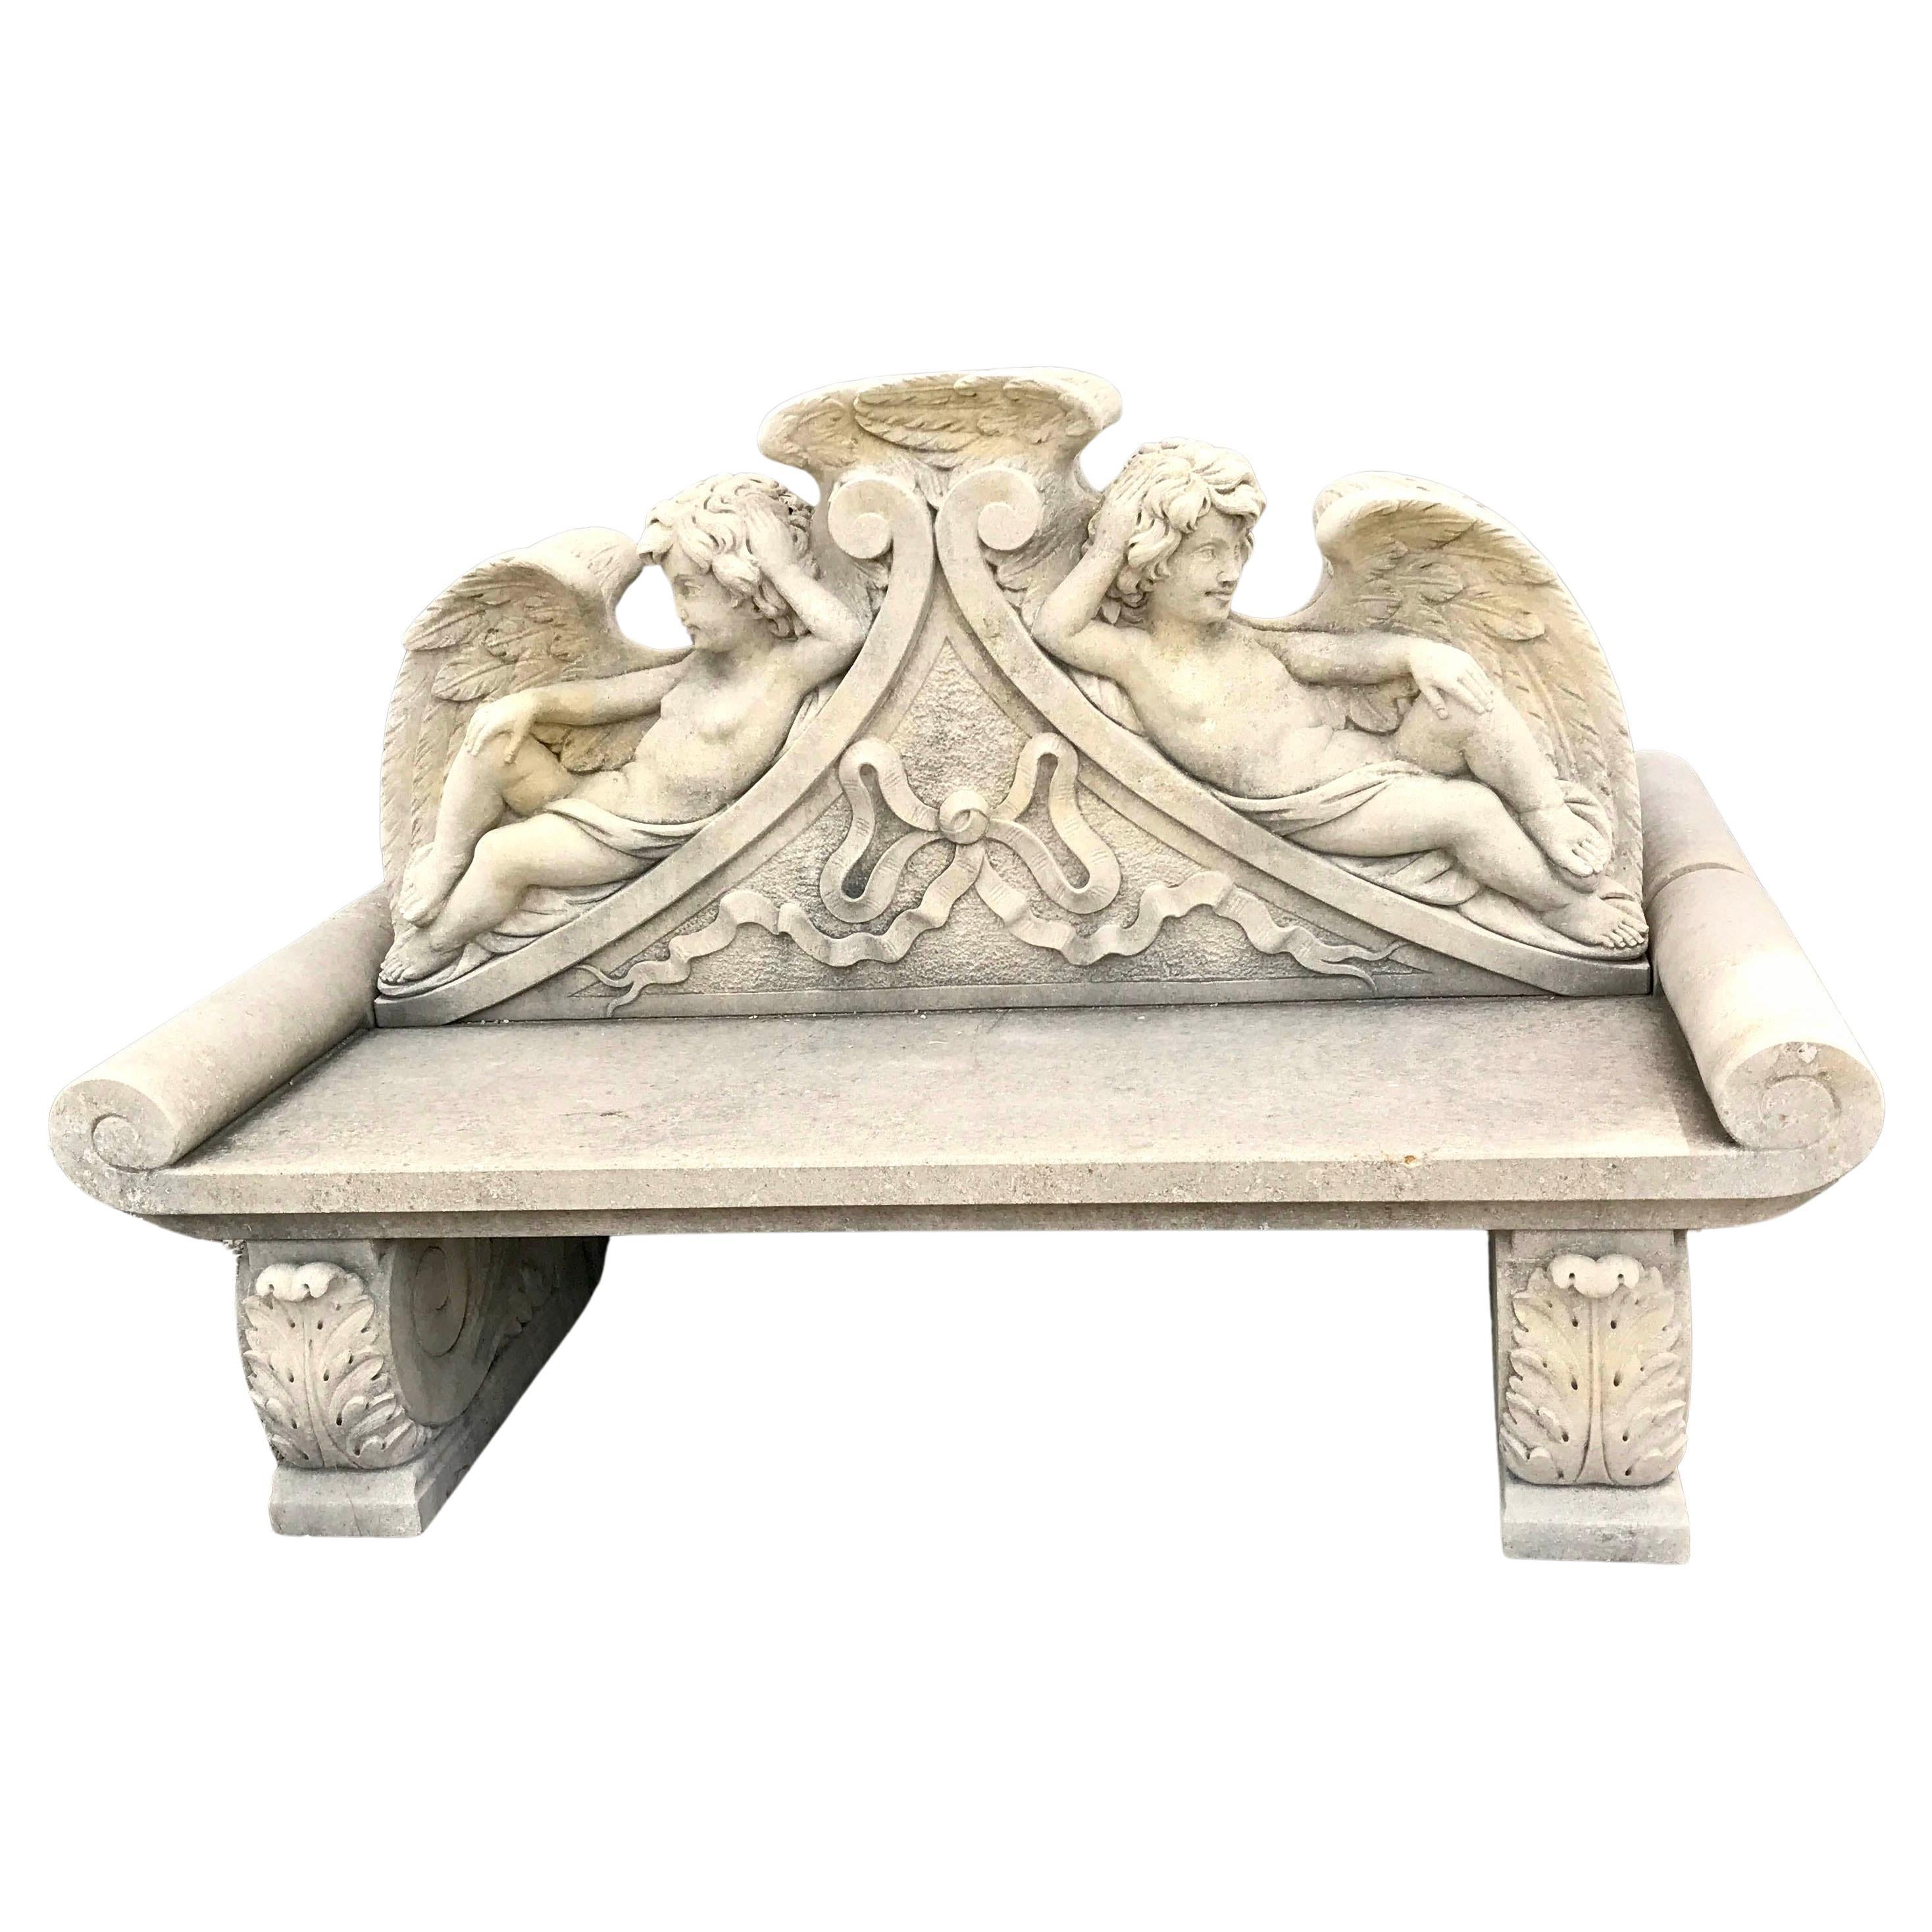 Outdoor Italian Finely Carved Large Lime Stone Bench Garden Furniture For Sale